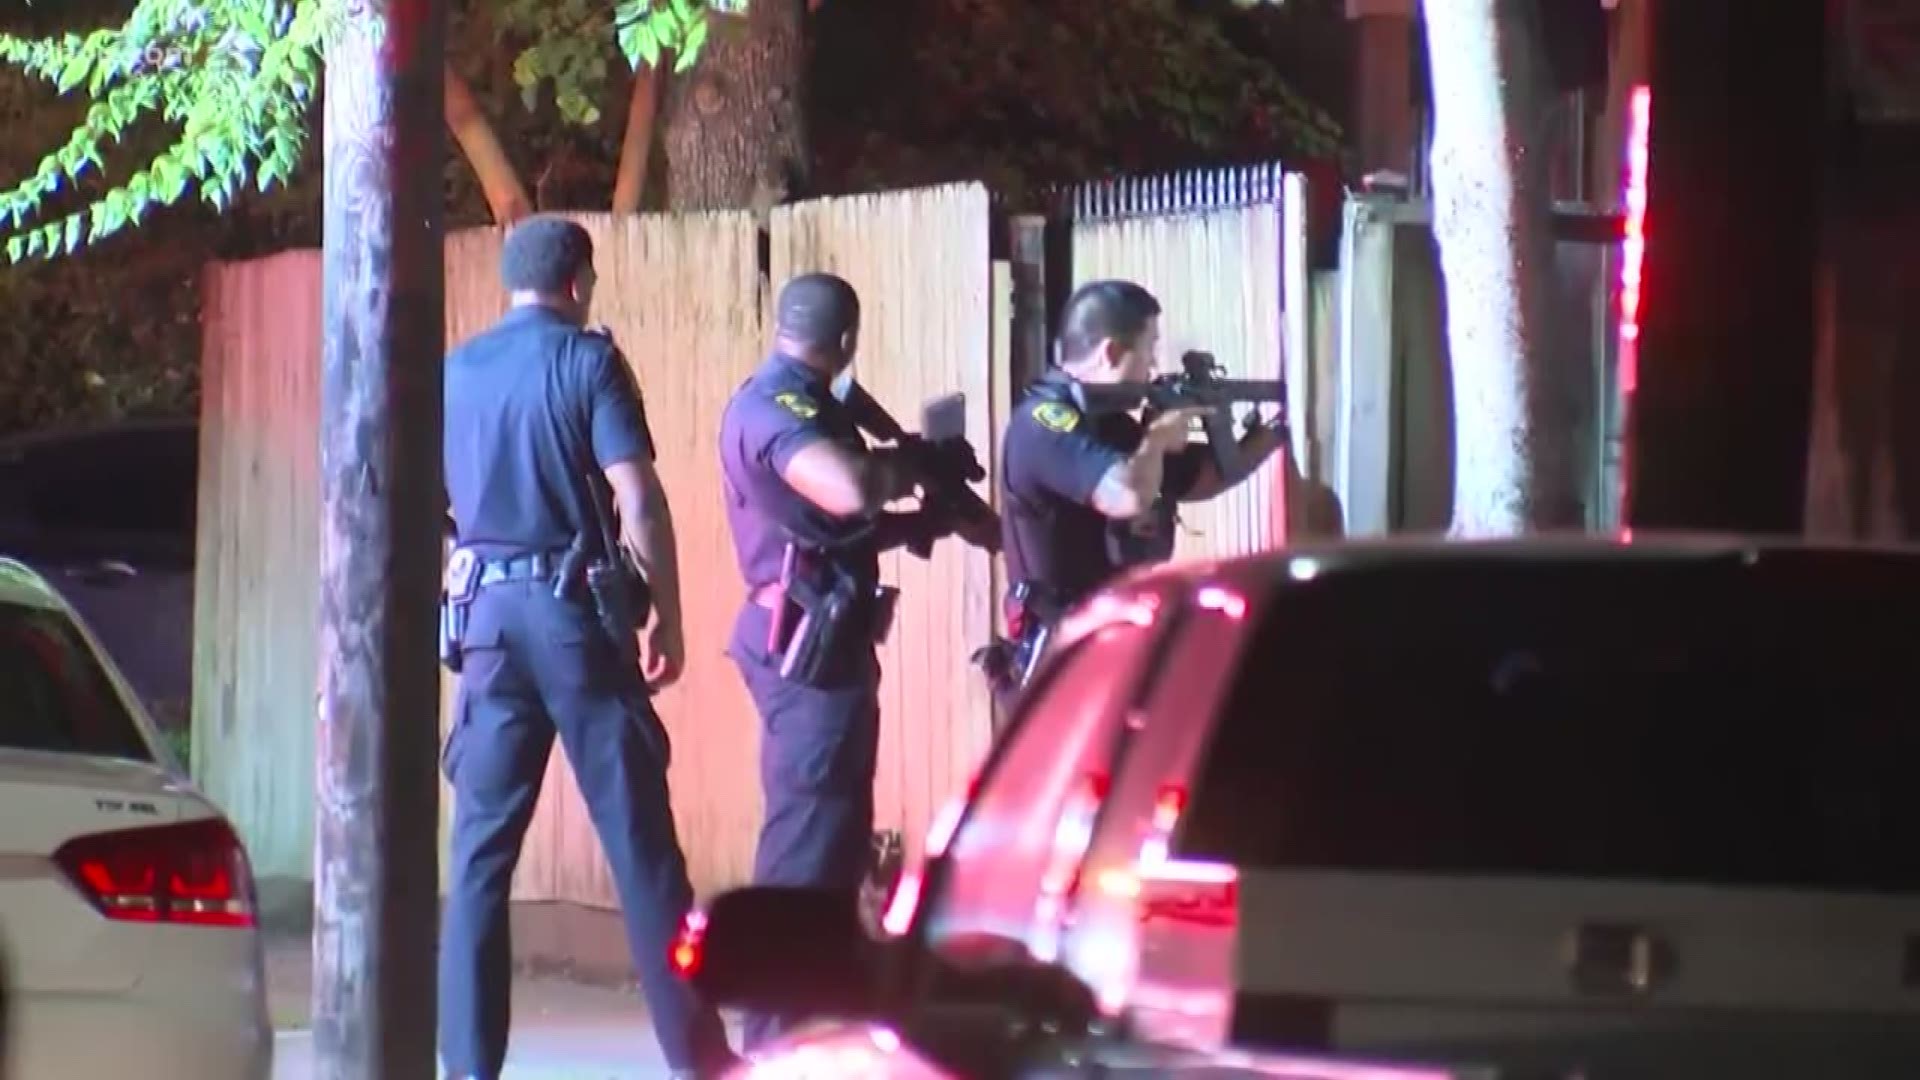 A father was shot in an attempted home invasion in the Heights overnight.